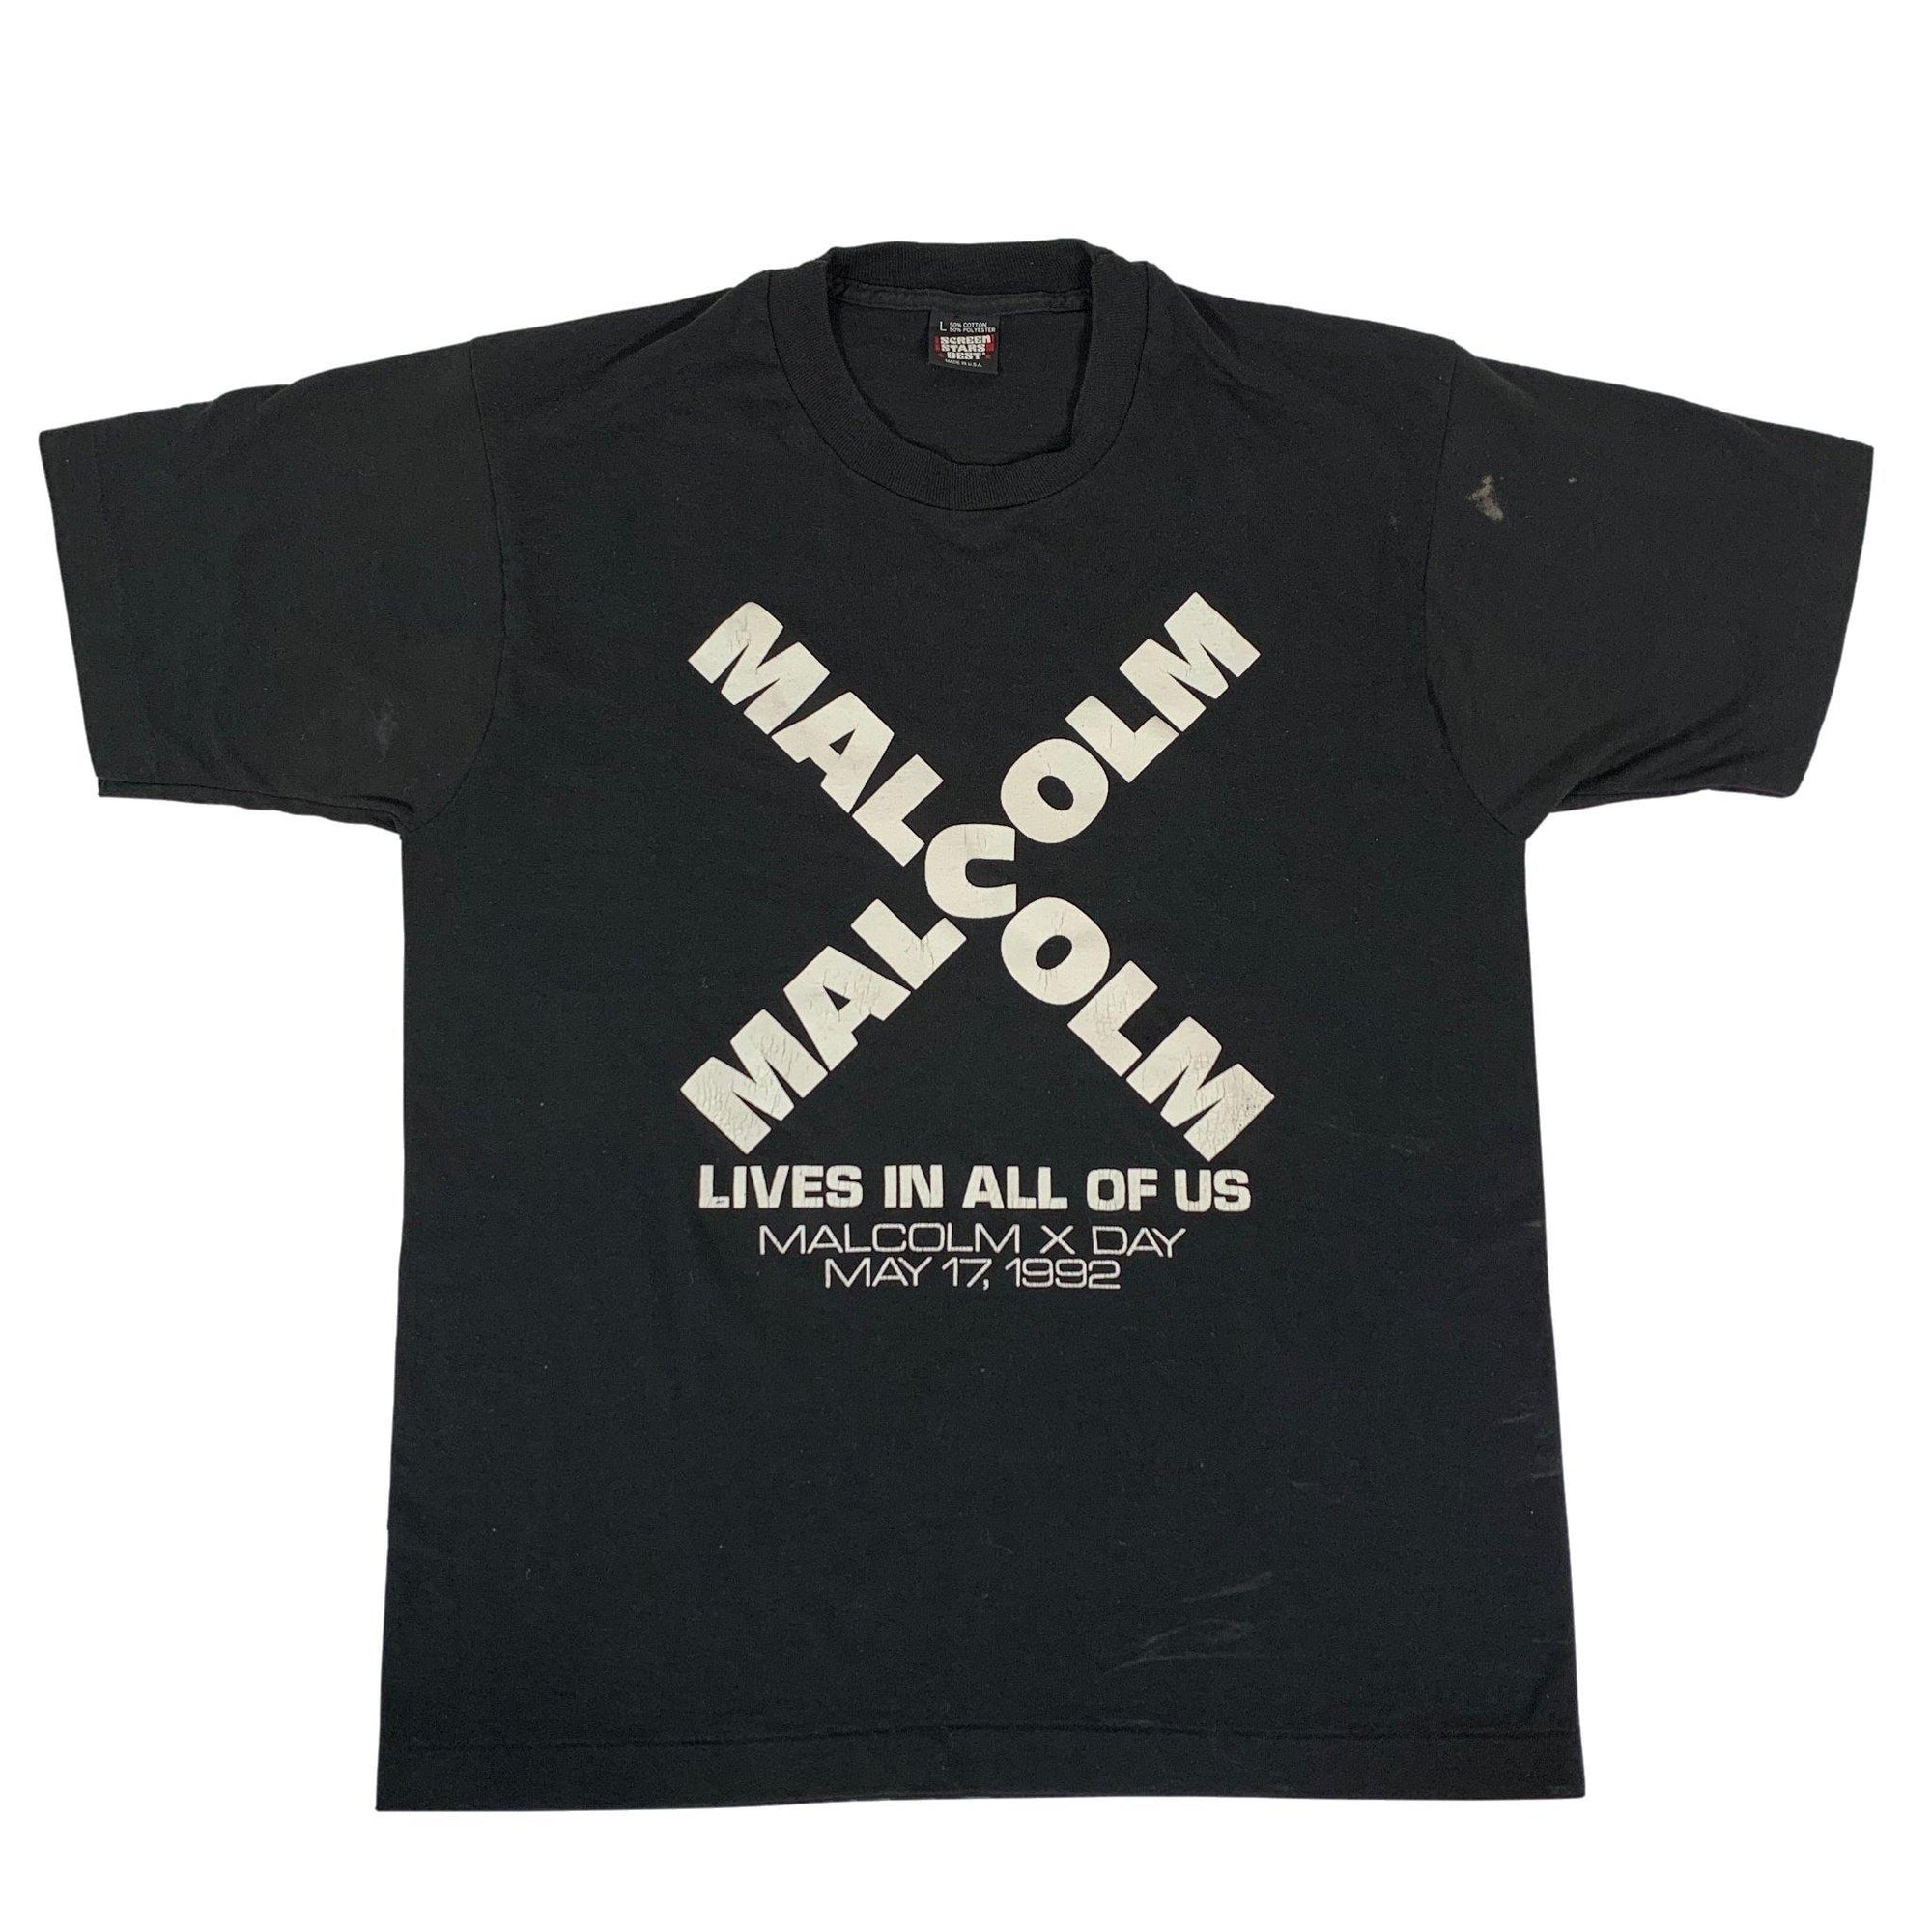 Vintage Malcolm X "Lives In All Of Us" T-Shirt - jointcustodydc